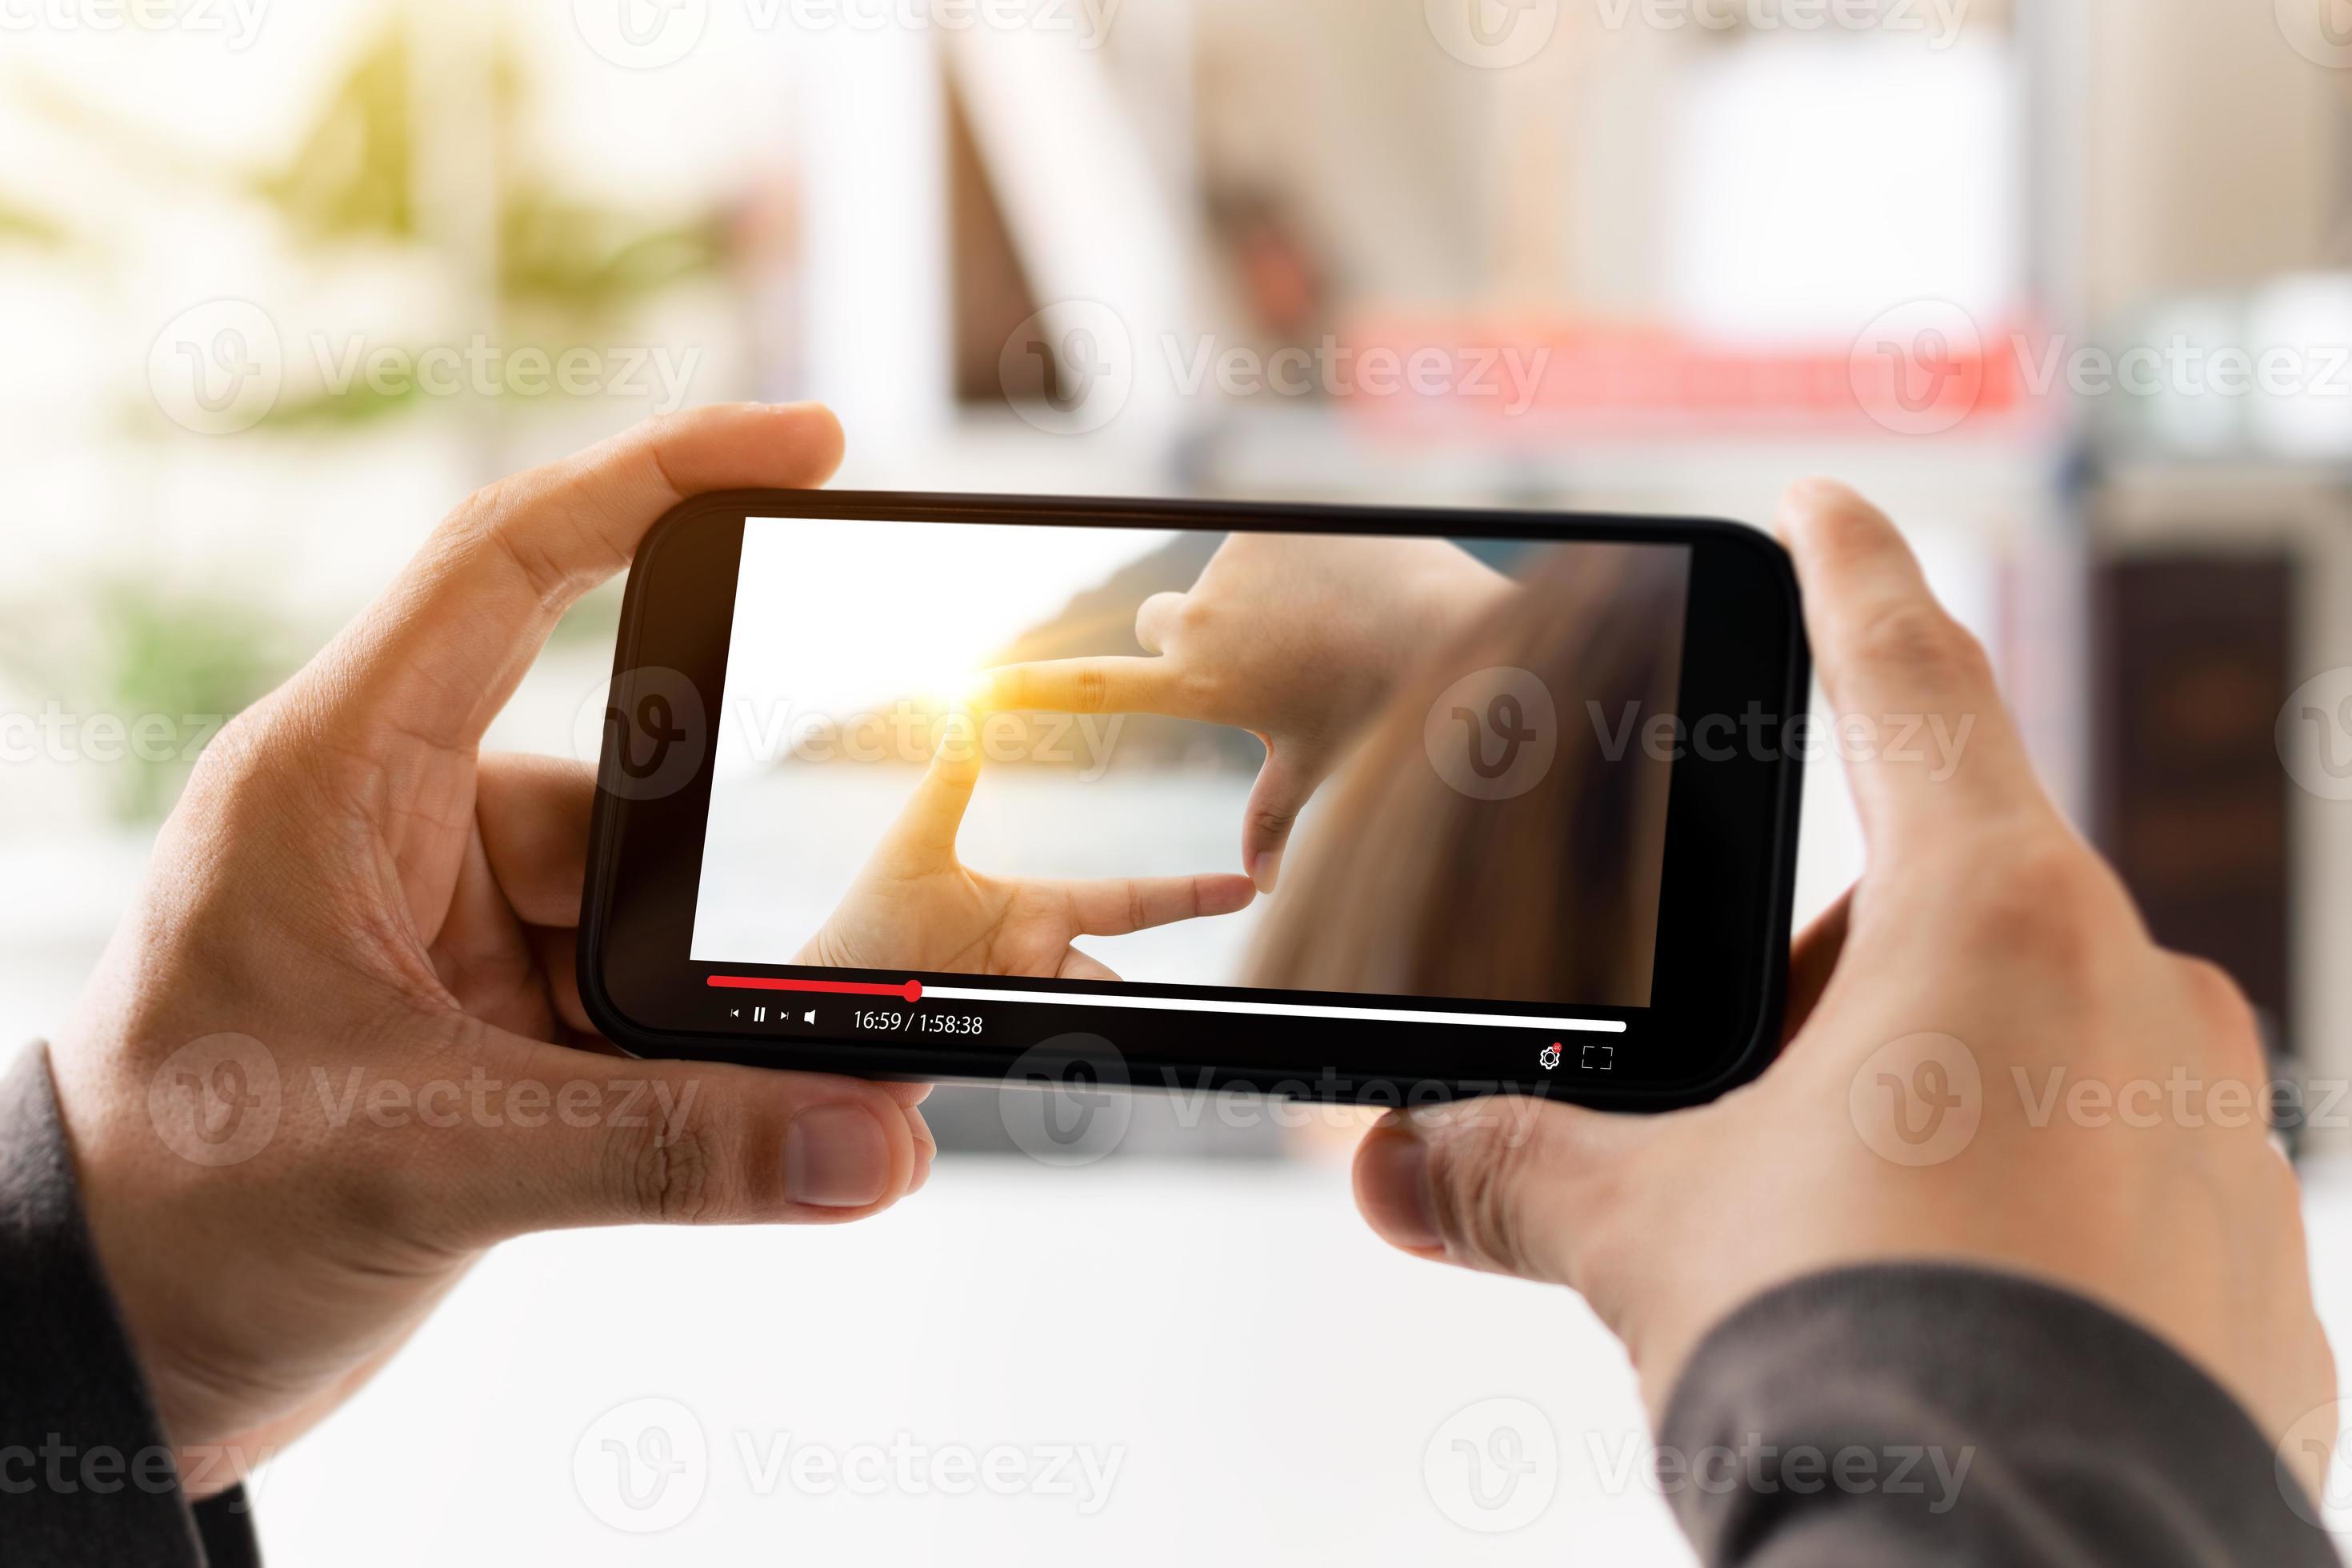 Online movie streaming with smartphone